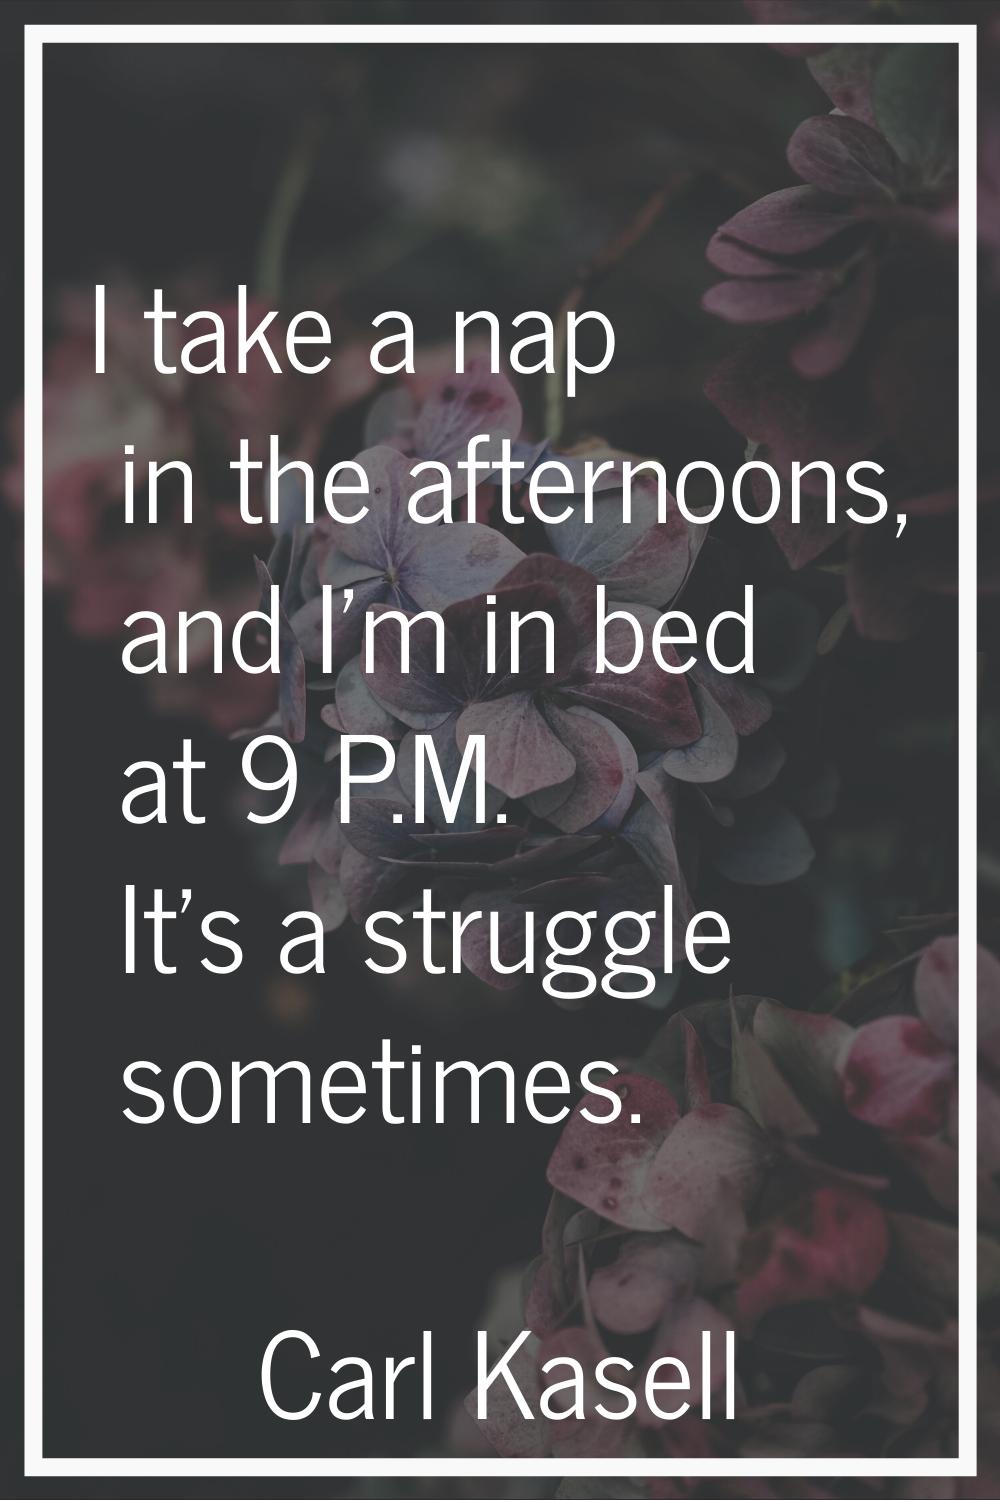 I take a nap in the afternoons, and I'm in bed at 9 P.M. It's a struggle sometimes.